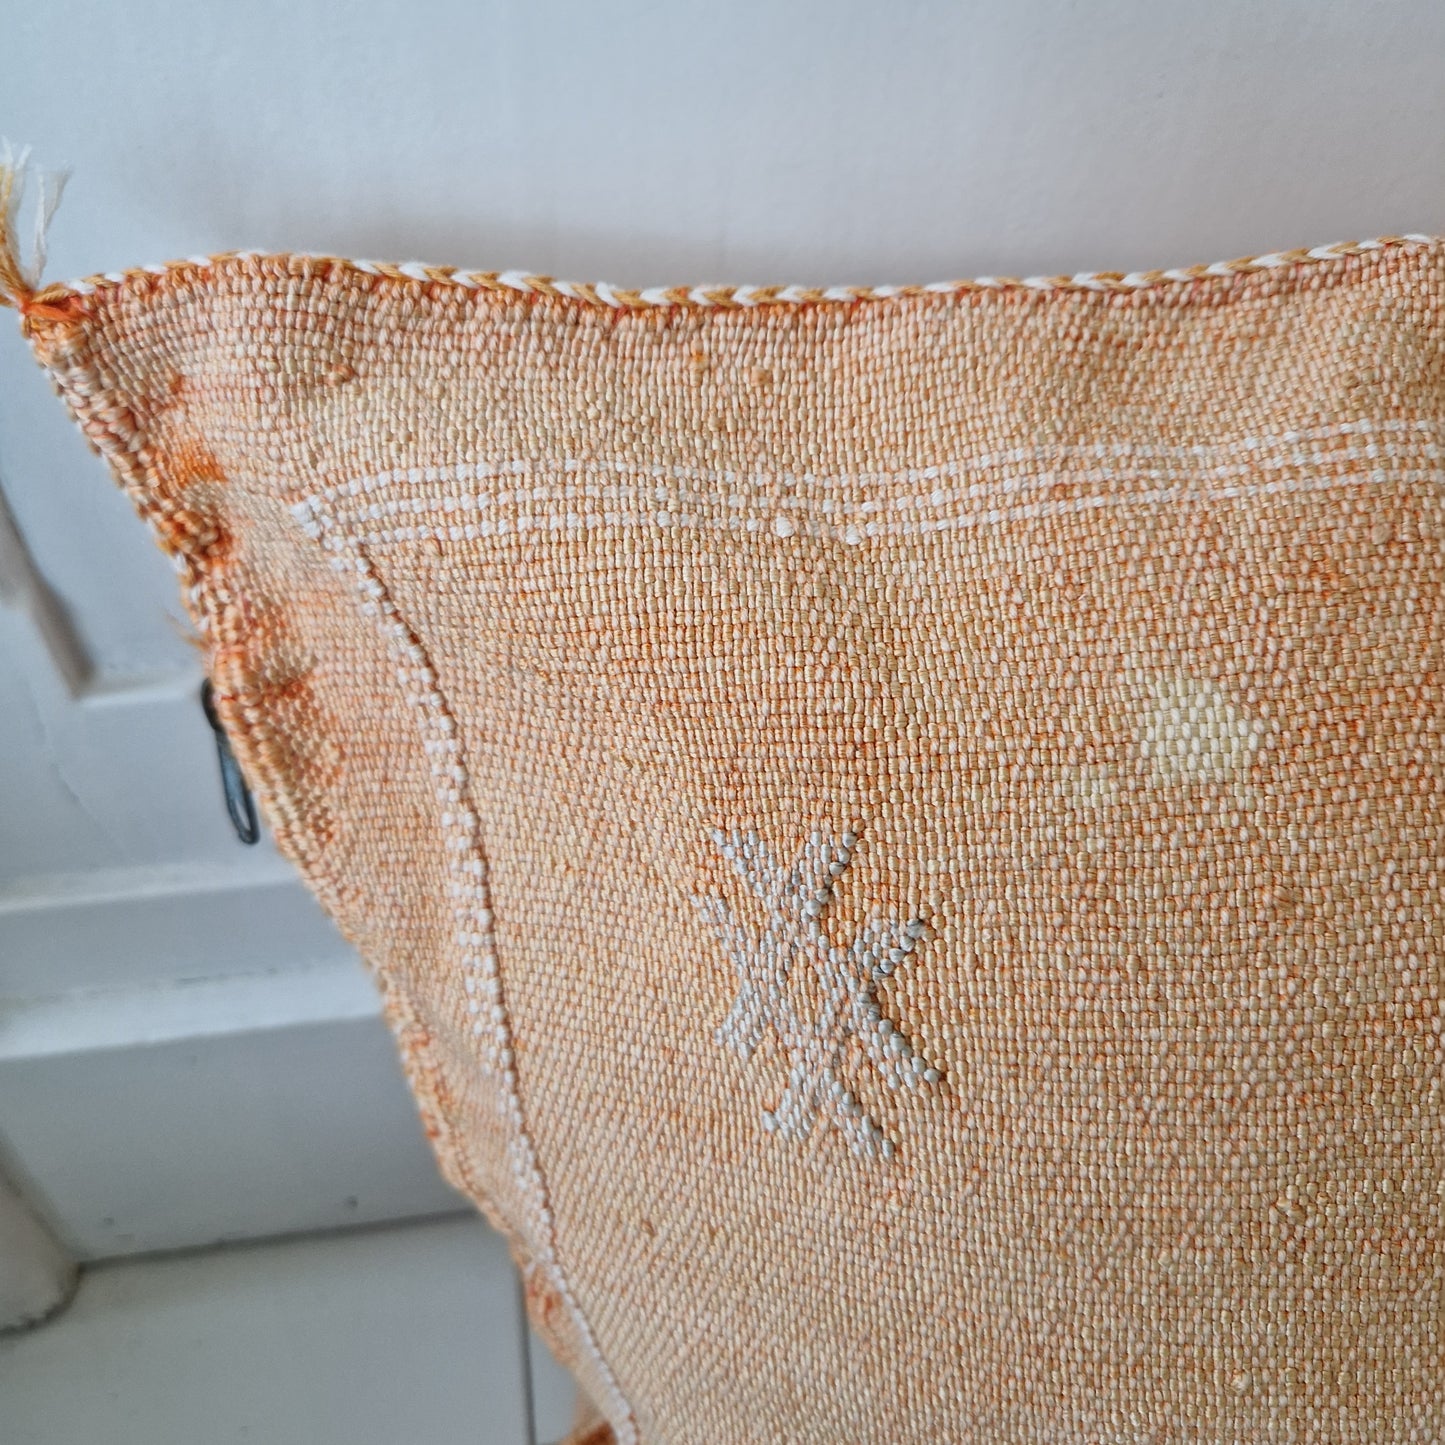 Sabra Silk cushion cover Vintage Orange with light stains on the front